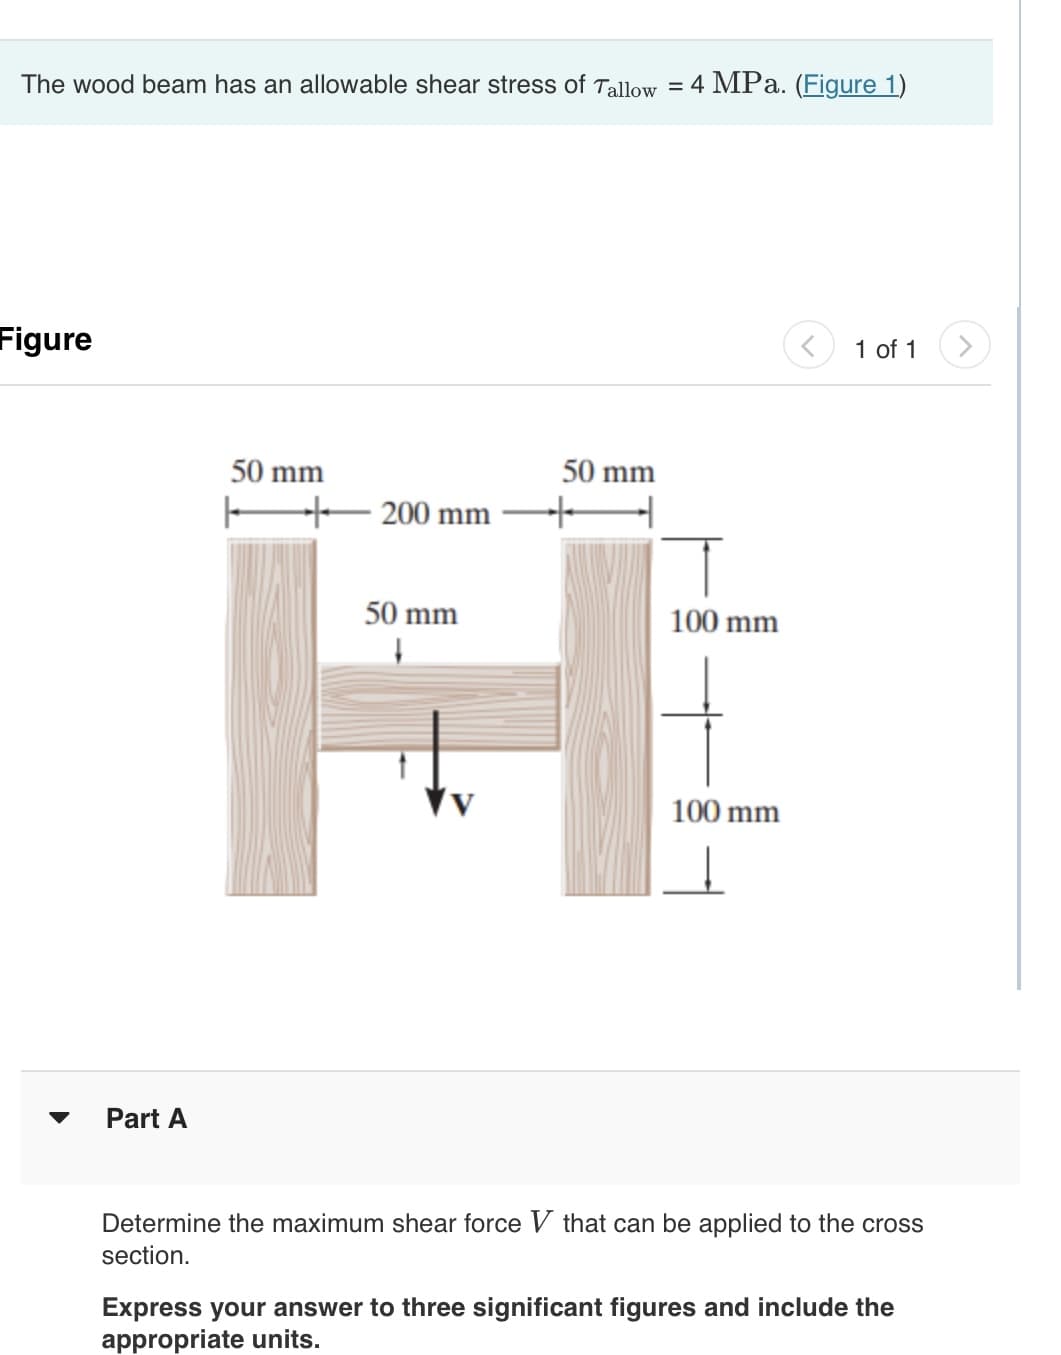 The wood beam has an allowable shear stress of Tallow = 4 MPa. (Figure 1)
Figure
Part A
50 mm
50 mm
200 mm —+ ➜
50 mm
↓
100 mm
100 mm
1 of 1
Determine the maximum shear force V that can be applied to the cross
section.
Express your answer to three significant figures and include the
appropriate units.